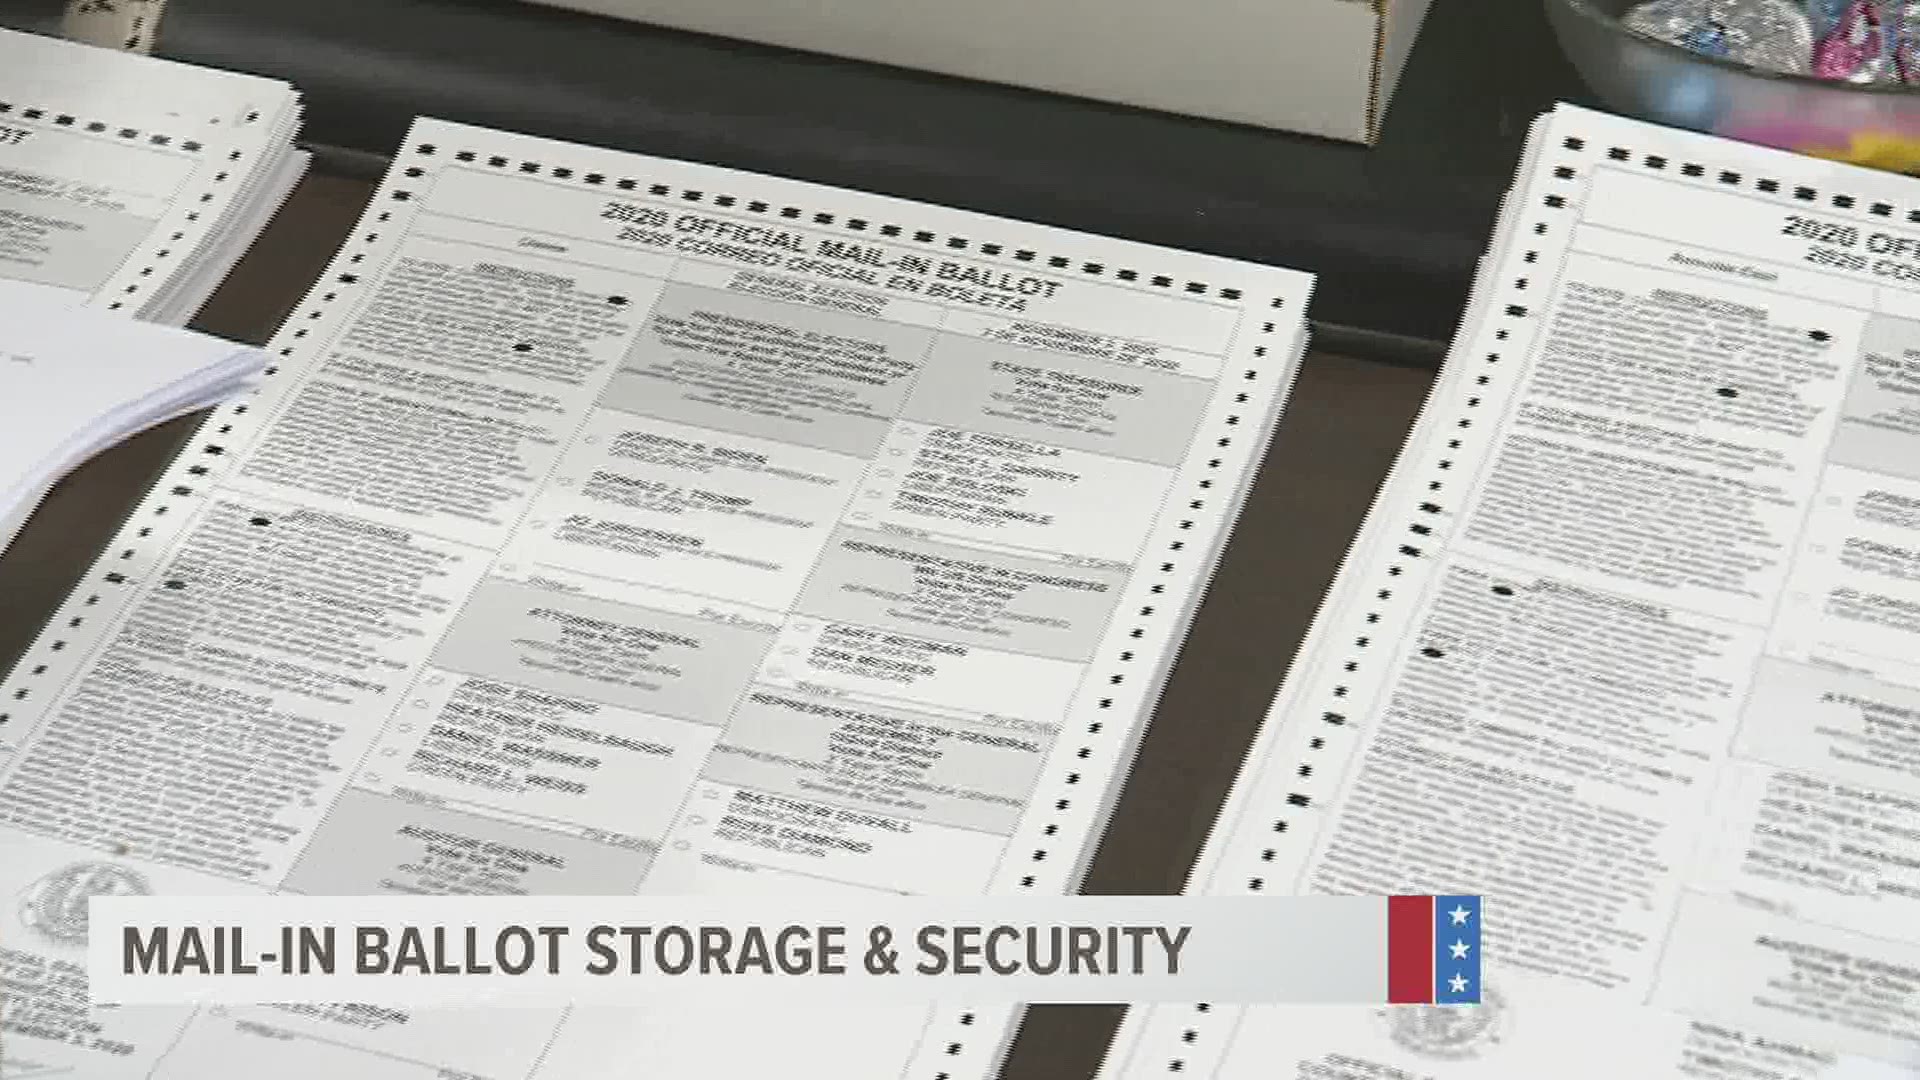 Some counties began mailing out mail-in ballots late last week. So far, more than 2 million Pennsylvanians have requested a mail-in ballot